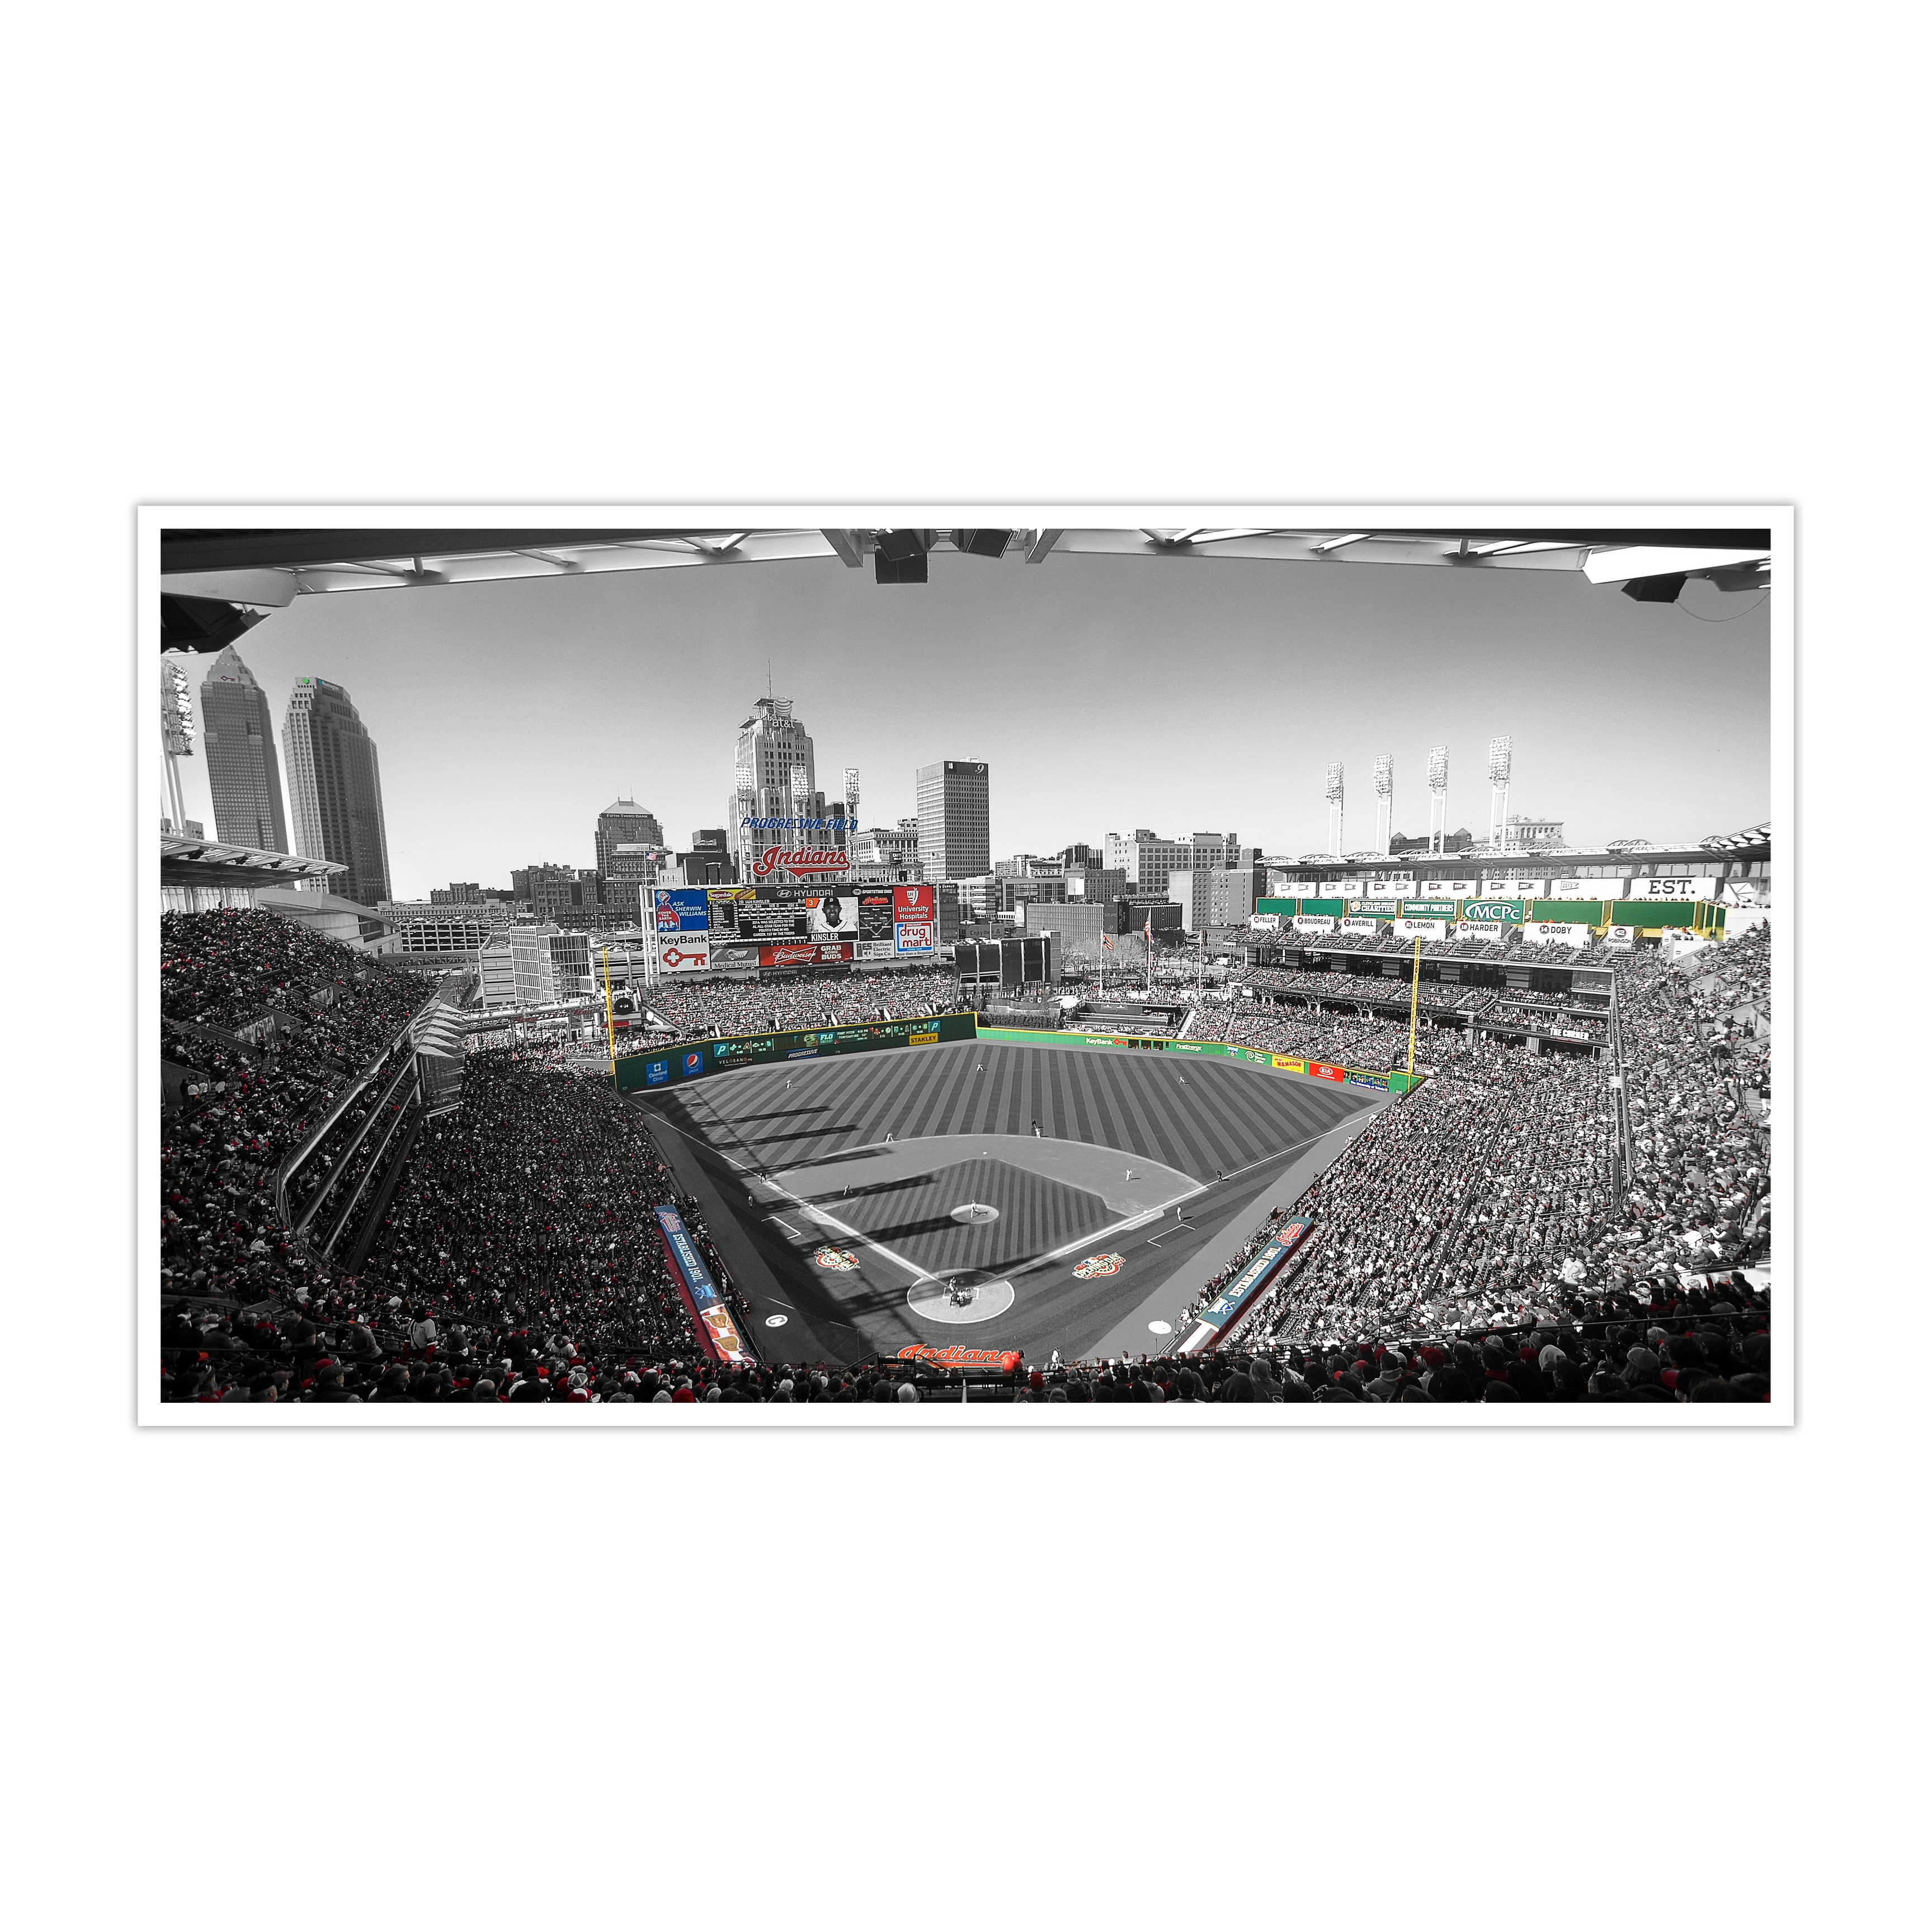 The best selling] Cleveland Indians MLB Flower All Over Print